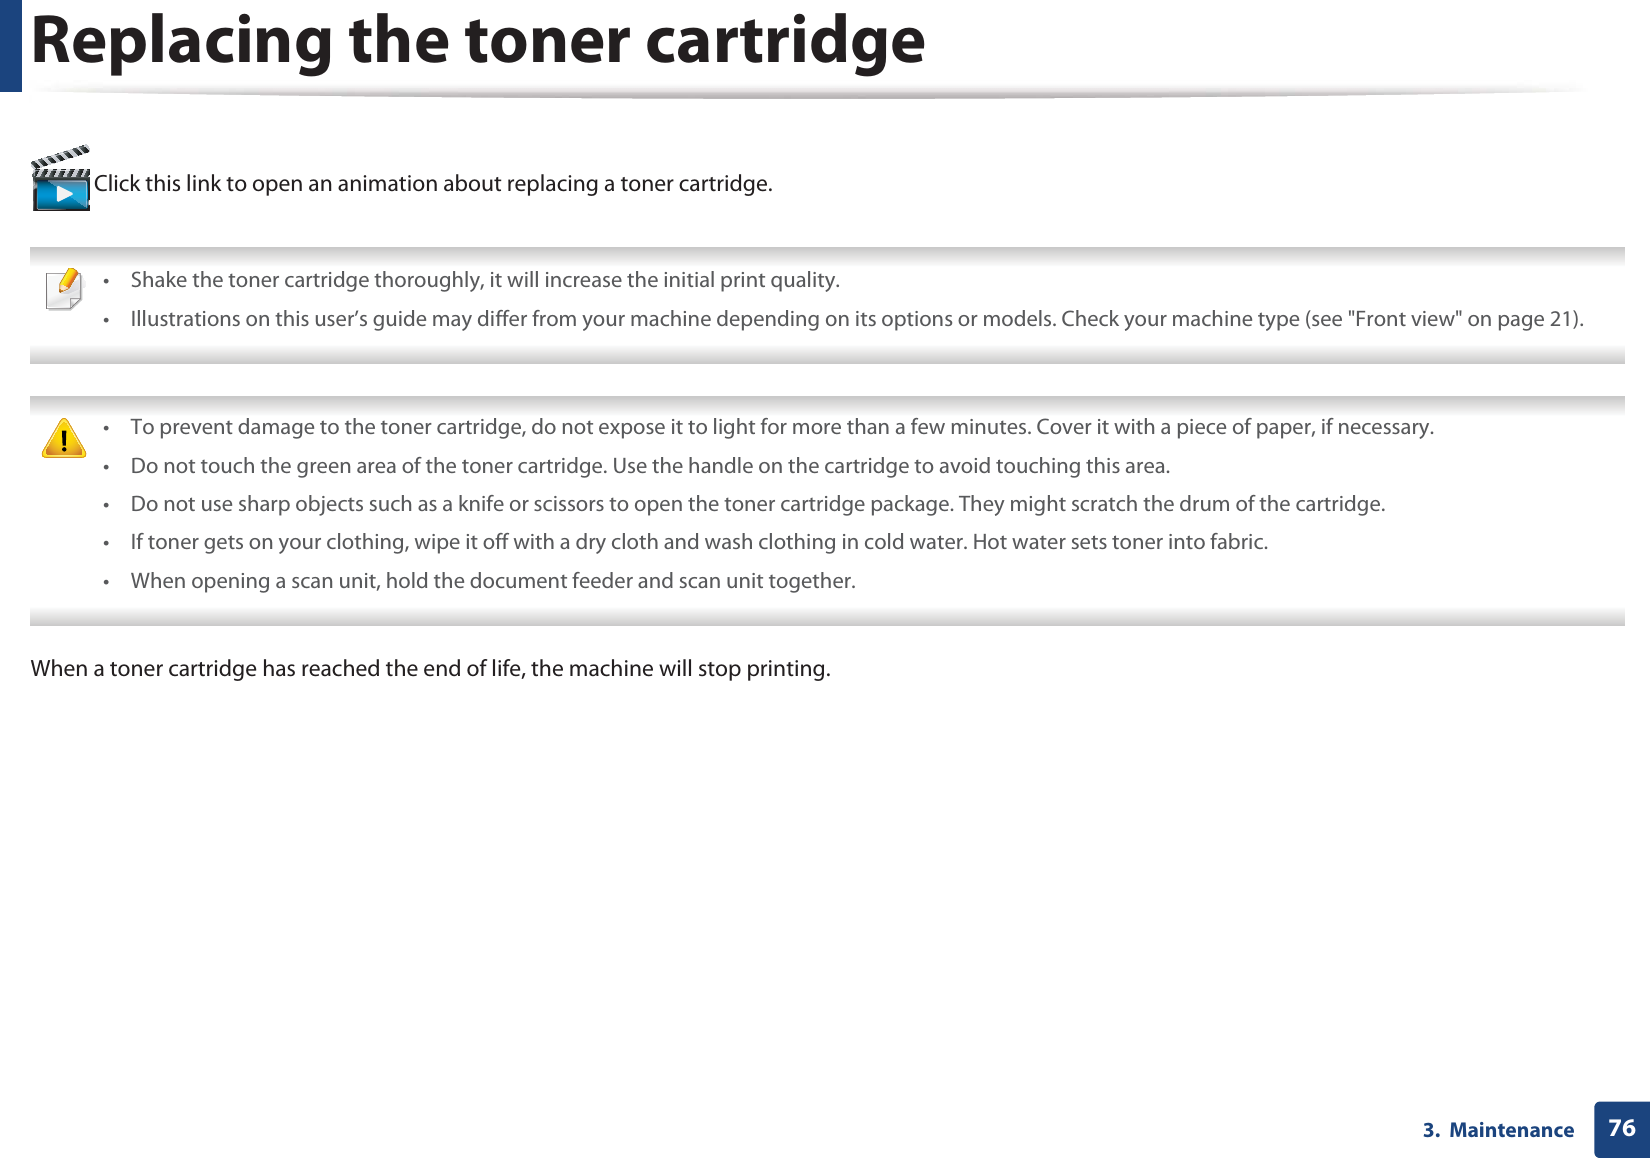 763.  MaintenanceReplacing the toner cartridge Click this link to open an animation about replacing a toner cartridge. • Shake the toner cartridge thoroughly, it will increase the initial print quality.• Illustrations on this user’s guide may differ from your machine depending on its options or models. Check your machine type (see &quot;Front view&quot; on page 21).  • To prevent damage to the toner cartridge, do not expose it to light for more than a few minutes. Cover it with a piece of paper, if necessary. • Do not touch the green area of the toner cartridge. Use the handle on the cartridge to avoid touching this area. • Do not use sharp objects such as a knife or scissors to open the toner cartridge package. They might scratch the drum of the cartridge.• If toner gets on your clothing, wipe it off with a dry cloth and wash clothing in cold water. Hot water sets toner into fabric.• When opening a scan unit, hold the document feeder and scan unit together. When a toner cartridge has reached the end of life, the machine will stop printing.